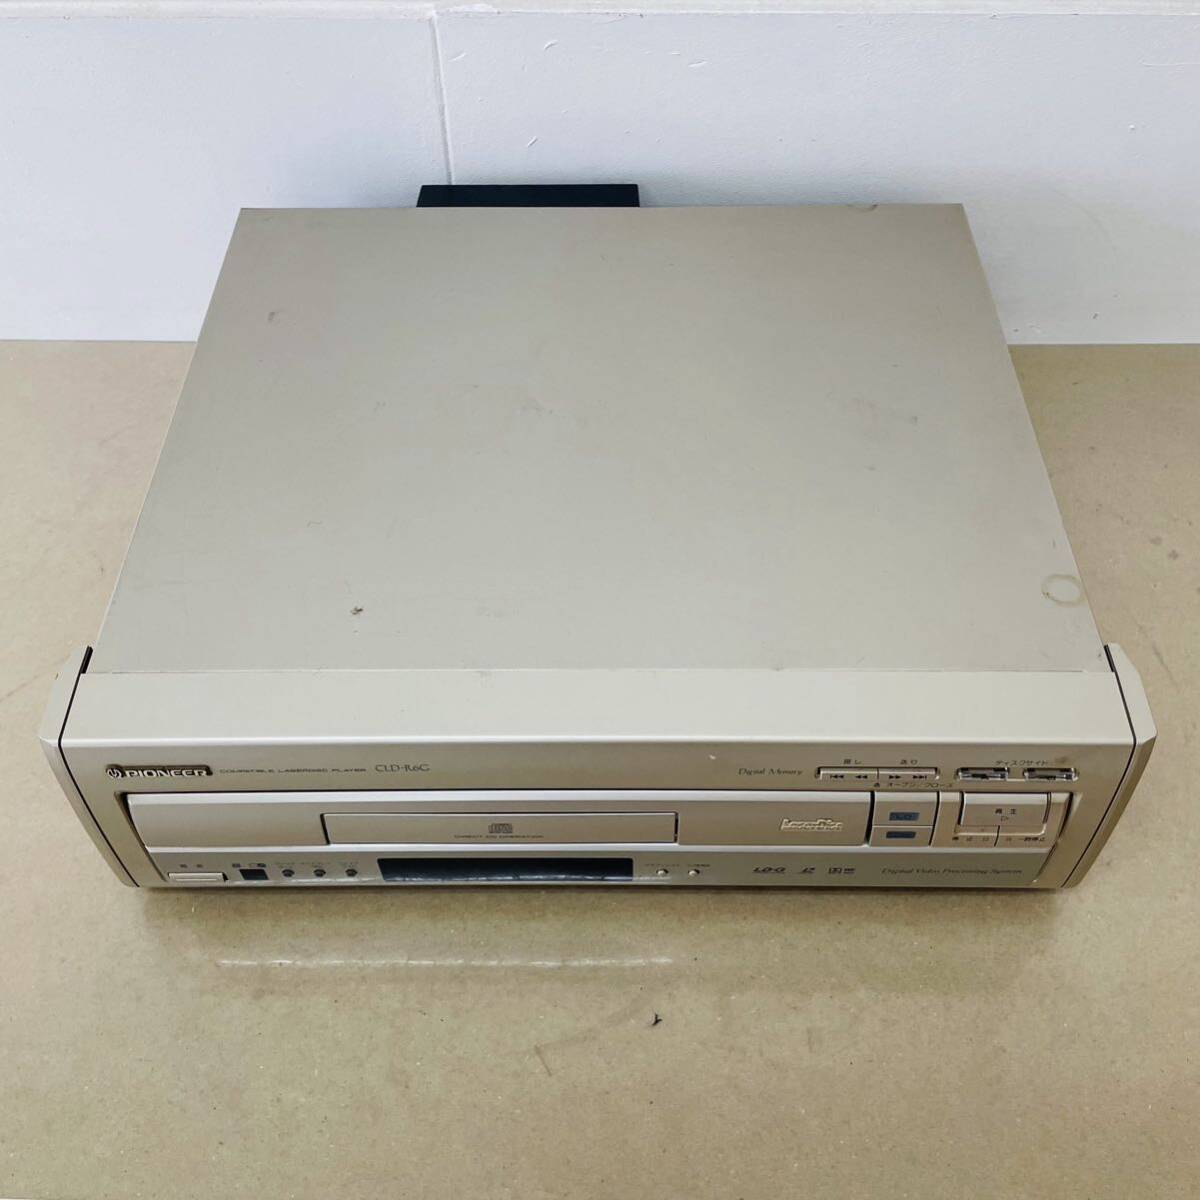  Junk Pioneer CLD-R6G CD/LD player tray opening and closing un- possible i15816 140 size shipping 